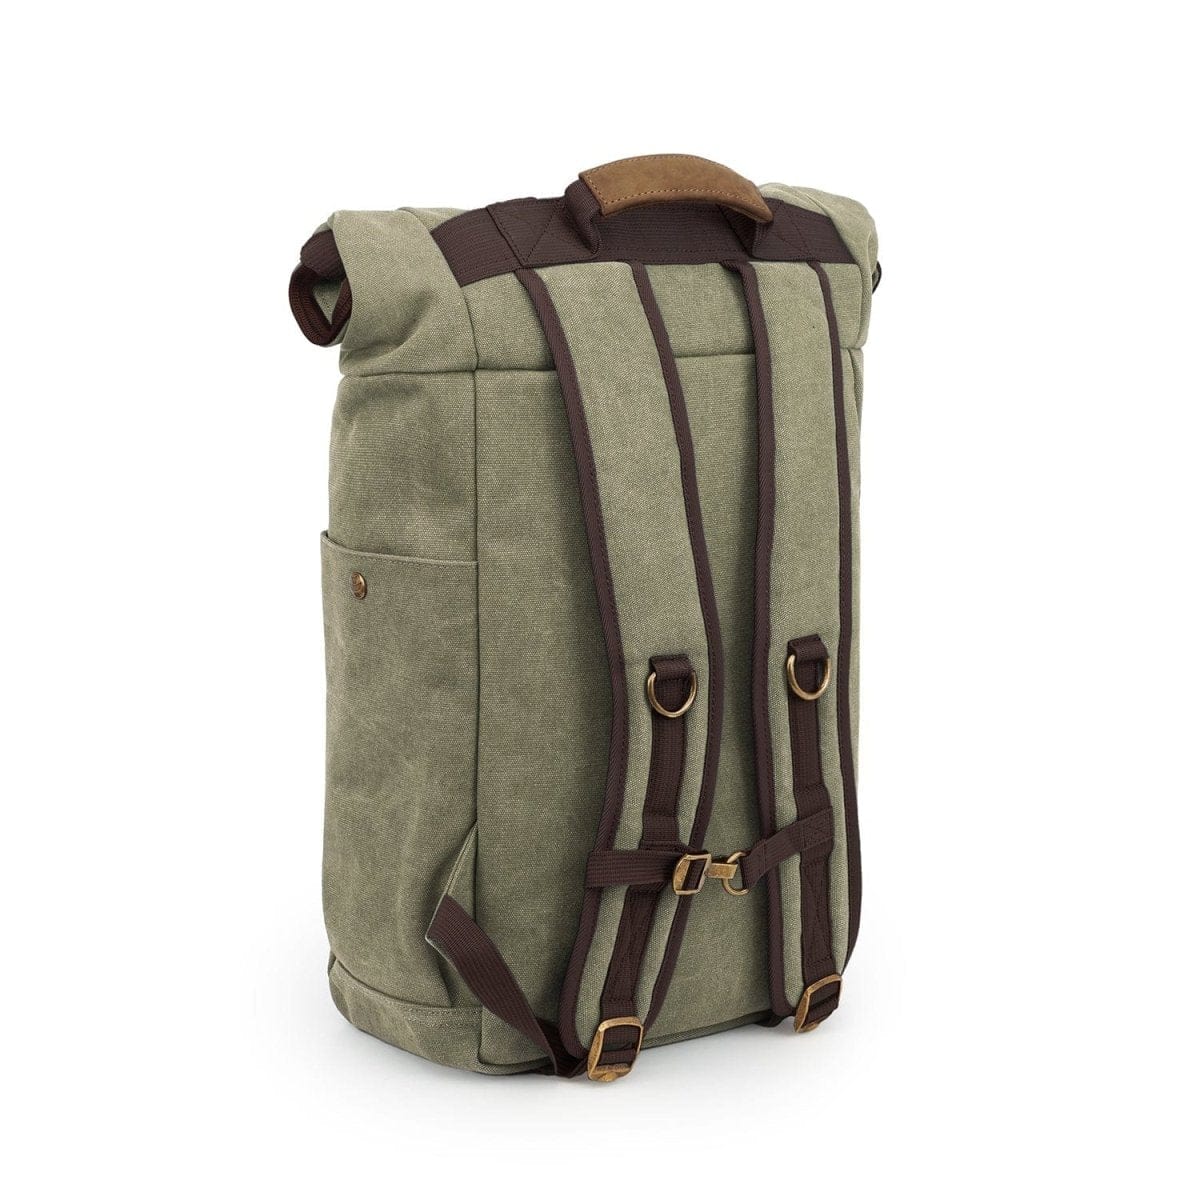 Revelry Supply Travel Bag The Drifter - Smell Proof Rolltop Backpack